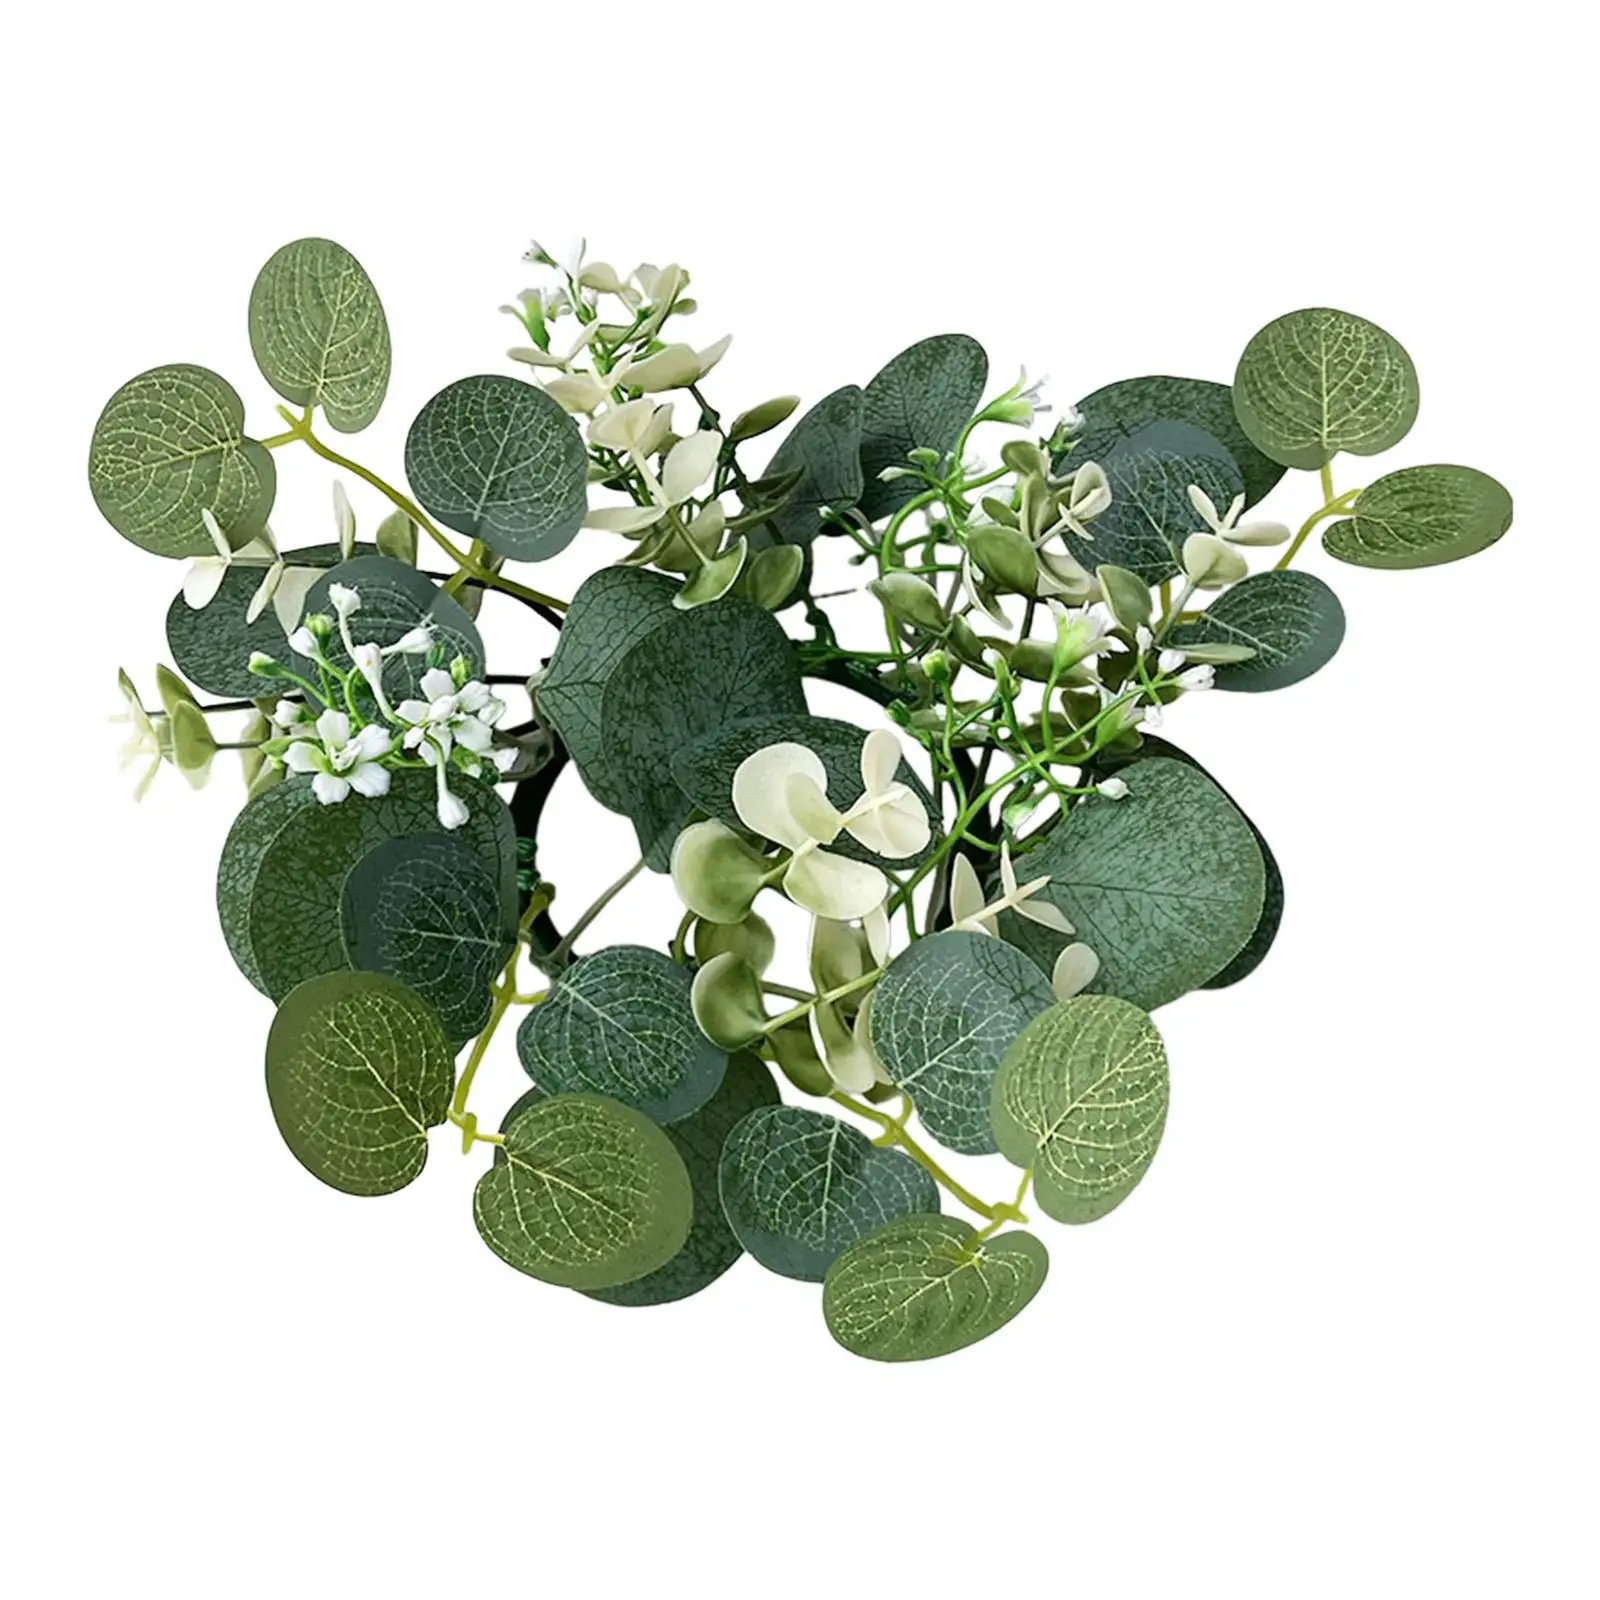 Candle Ring Artificial Eucalyptus Leaves Wreath Home Decor 9.8inch Small Boho Wreath for Farmhouse Kitchen Door Dining Room